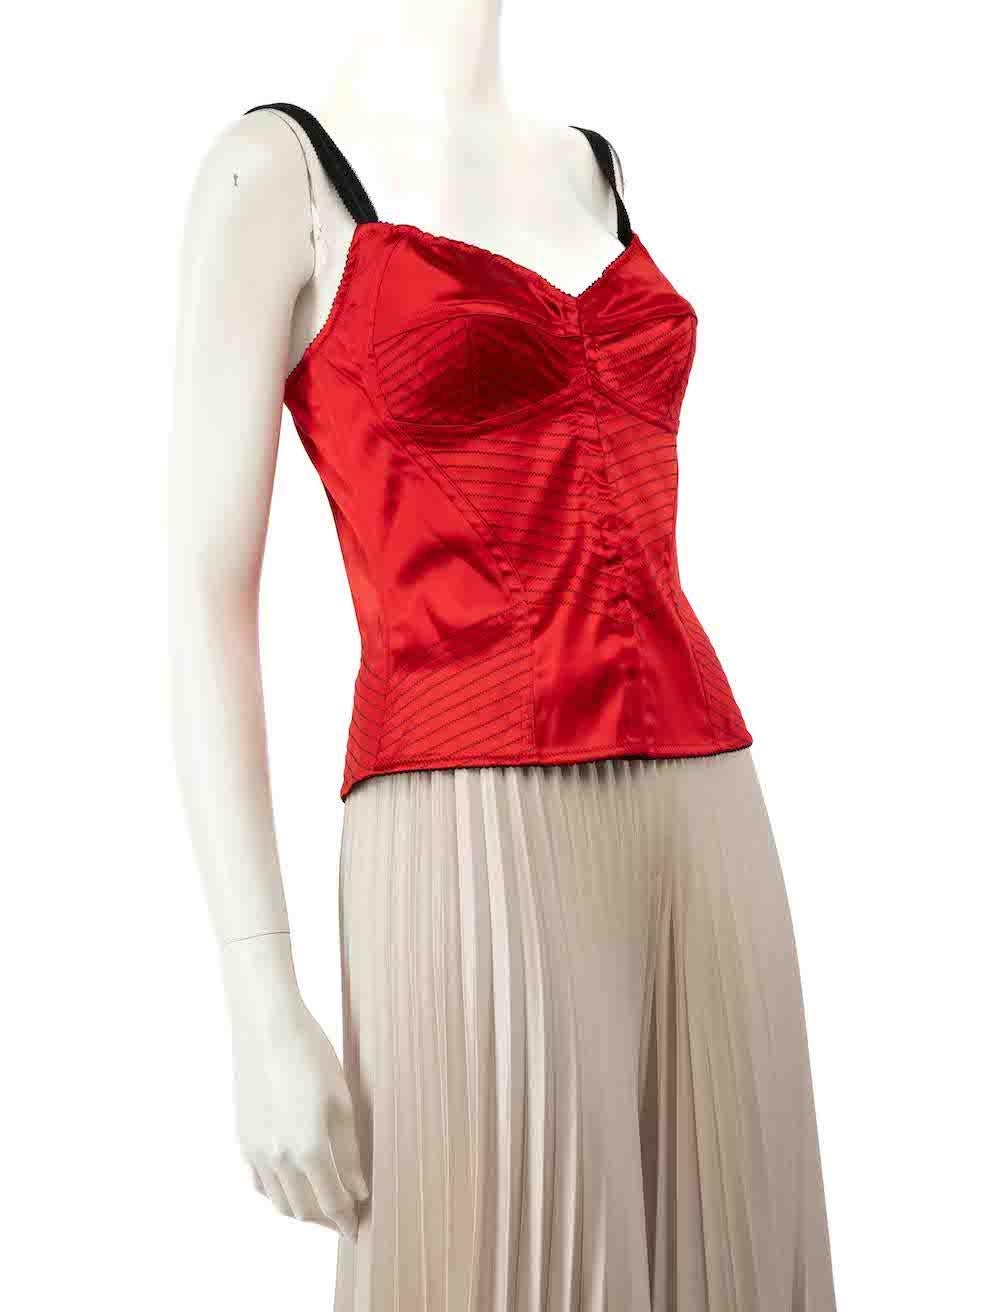 CONDITION is Very good. Minimal wear to top is evident. Minimal wear to right side of the back is seen with a small mark. The composition label is missing on this used Dolce & Gabbana designer resale item.
 
 
 
 Details
 
 
 Red
 
 Silk
 
 Corset